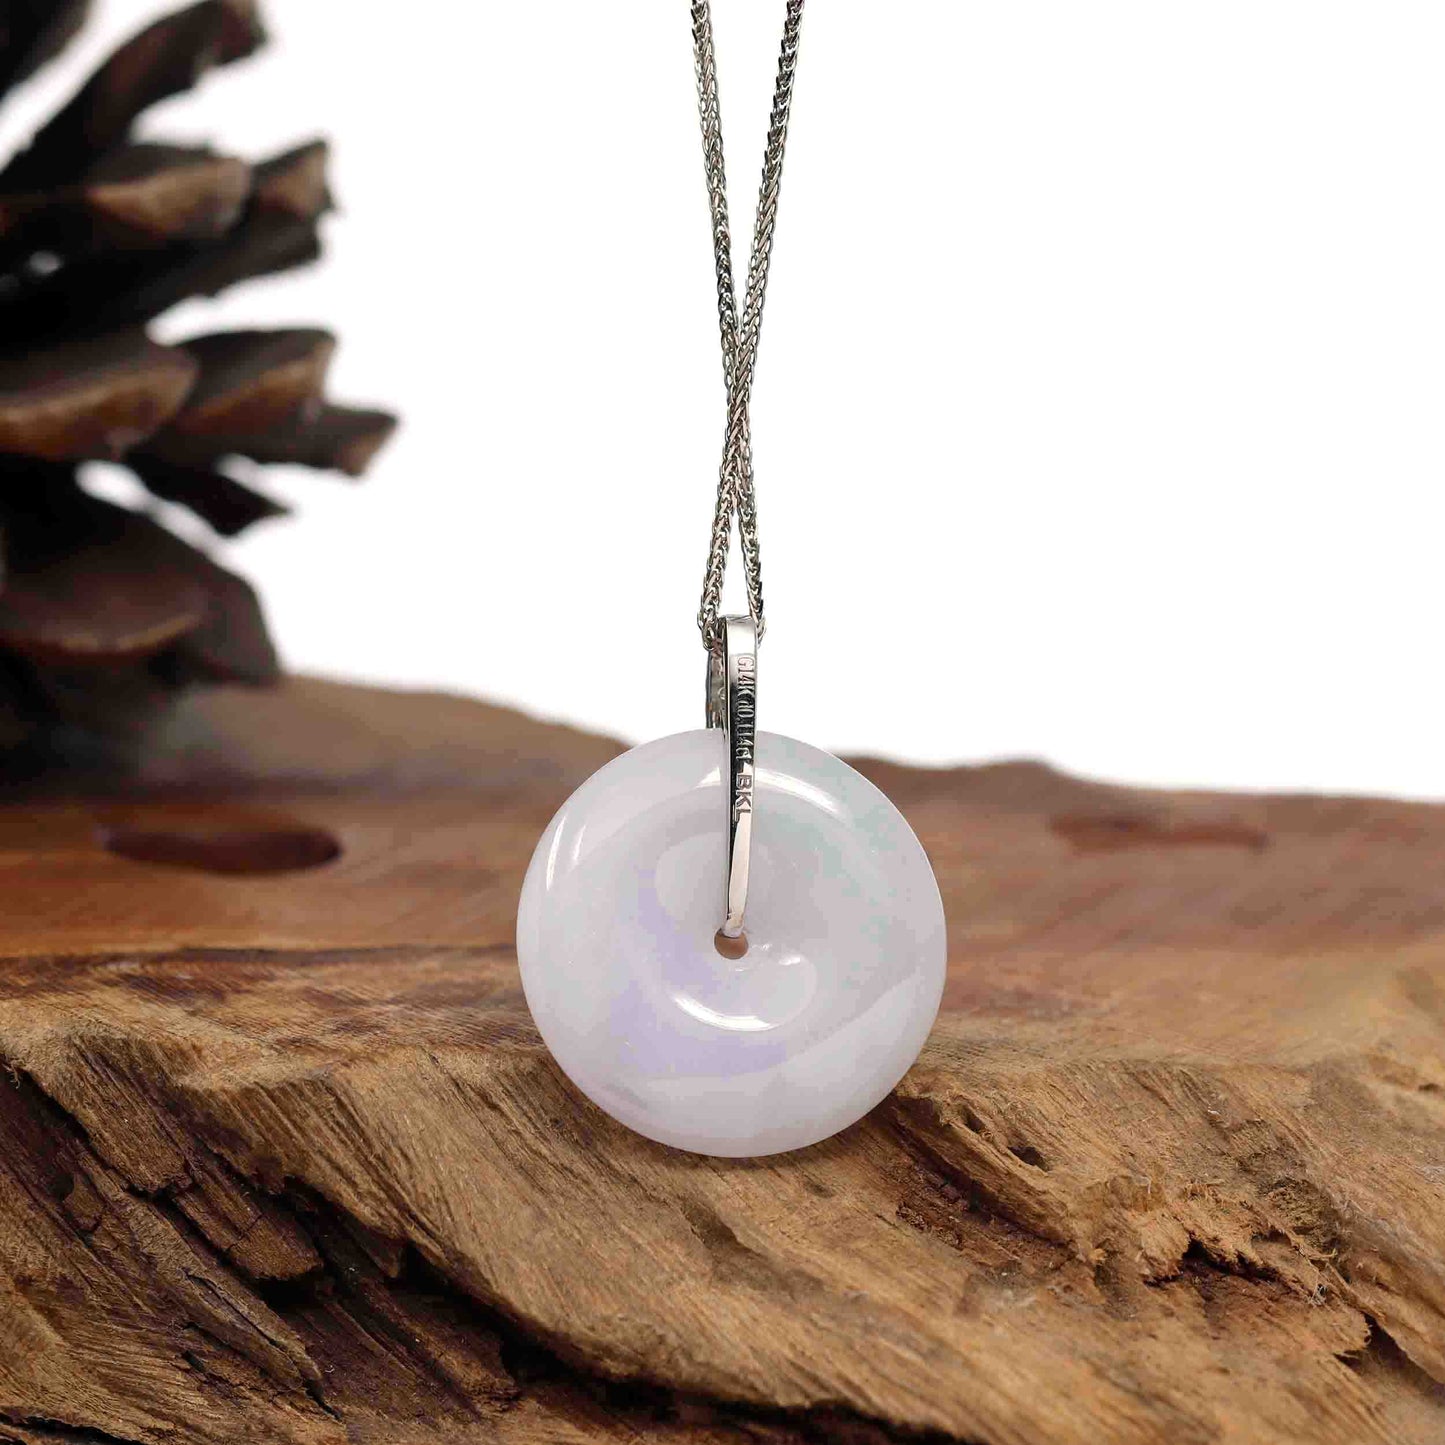 RealJade® Co. Gold Jadeite Jade Pendant Necklace 14K White Gold "Good Luck Button" Necklace Ice Lavender Jadeite Jade Pendant Necklace